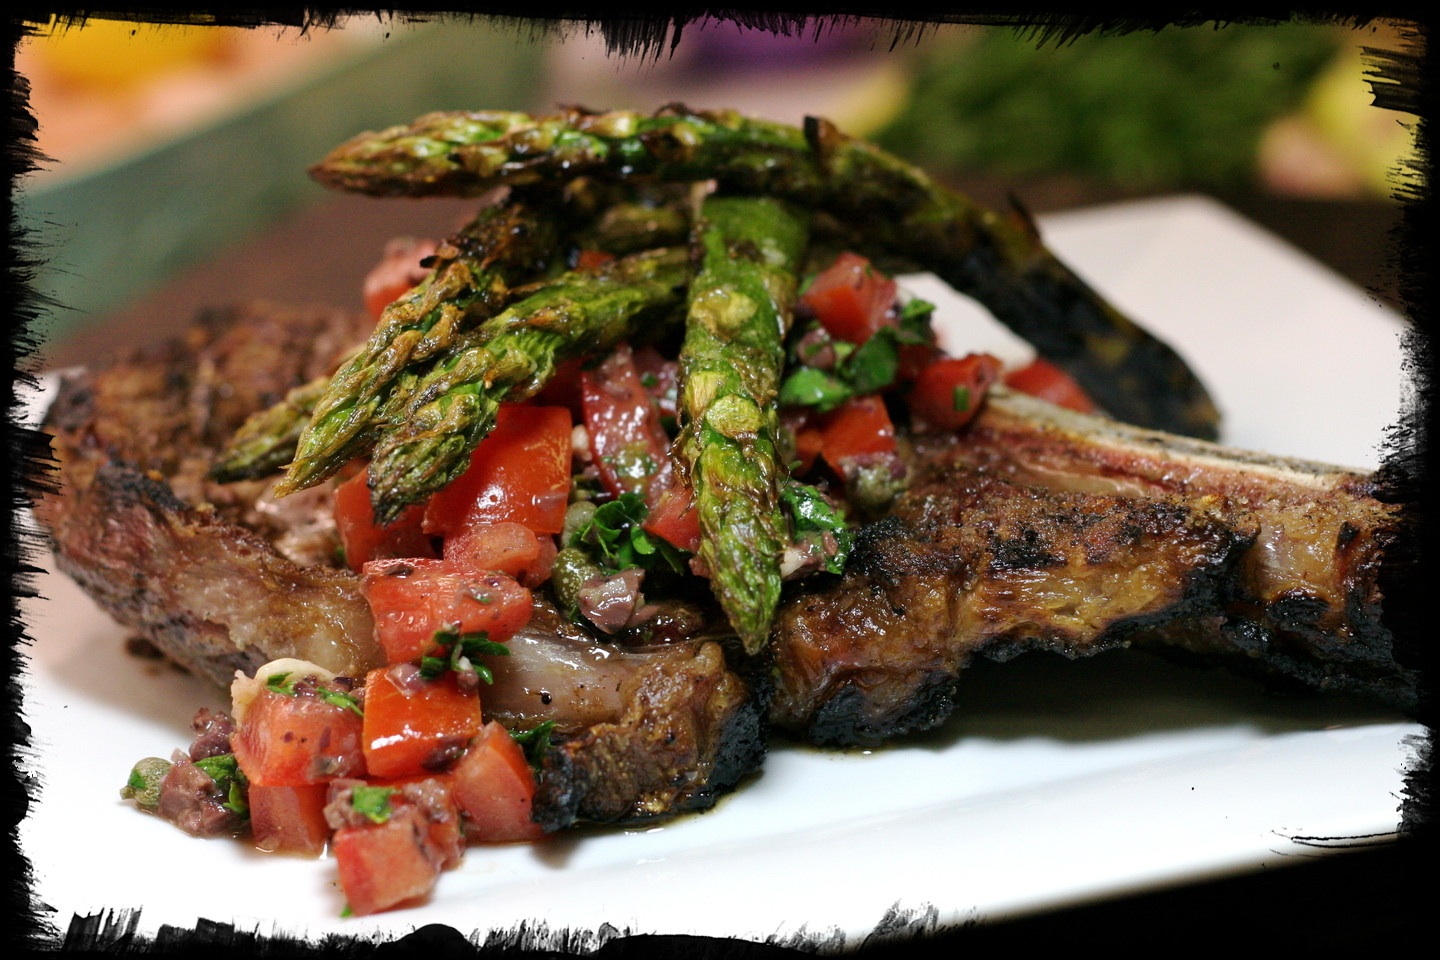 Grilled Steak and Asparagus with Tomato and Olive Tapenade